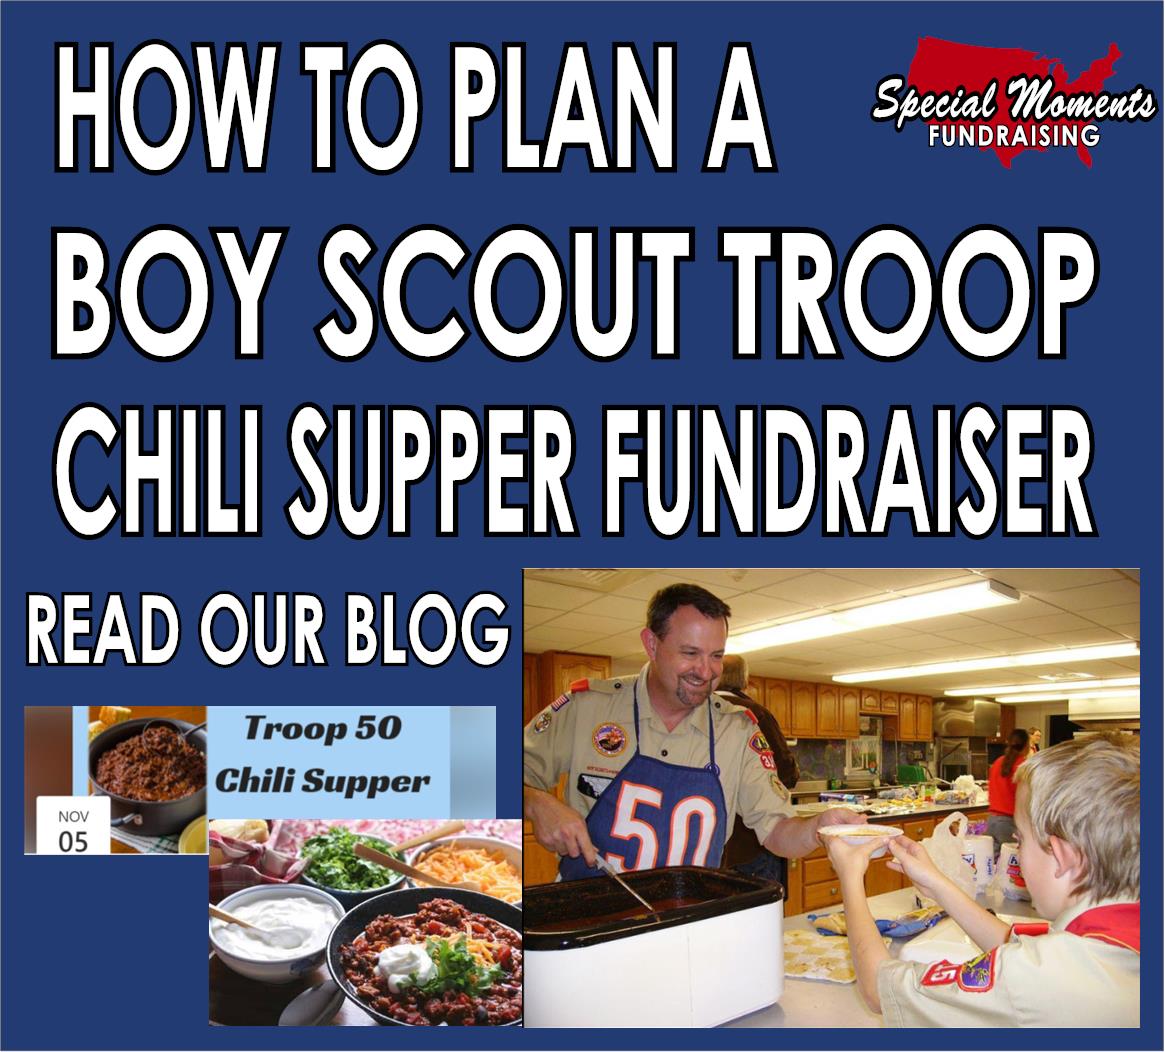 How To Plan A Boy Scout Troop Chili Supper Fundraiser